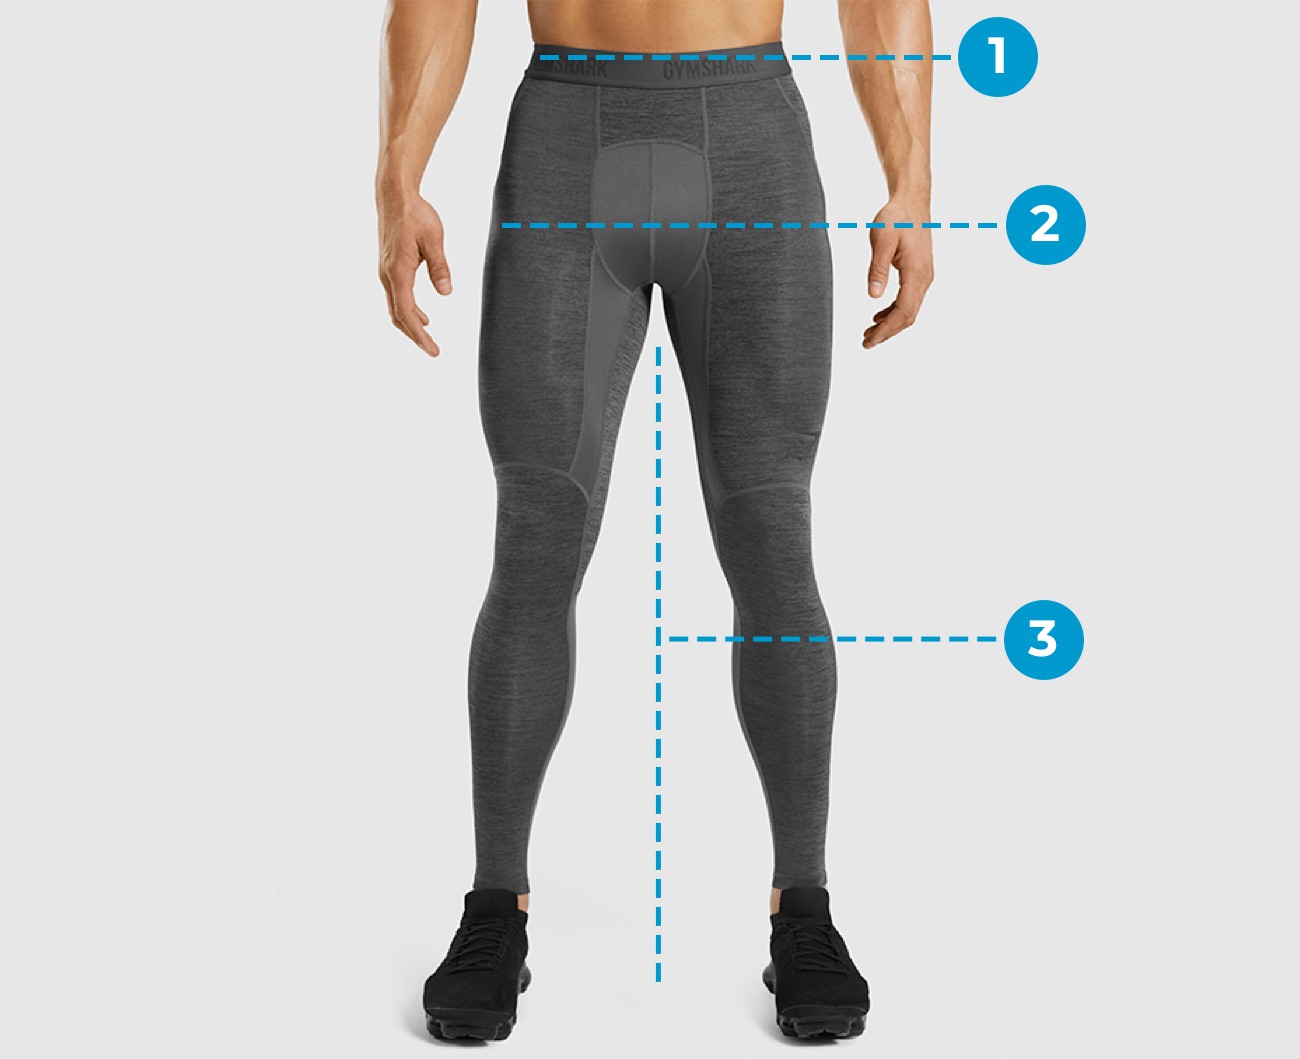 Mens Size Guide Bottoms Markings